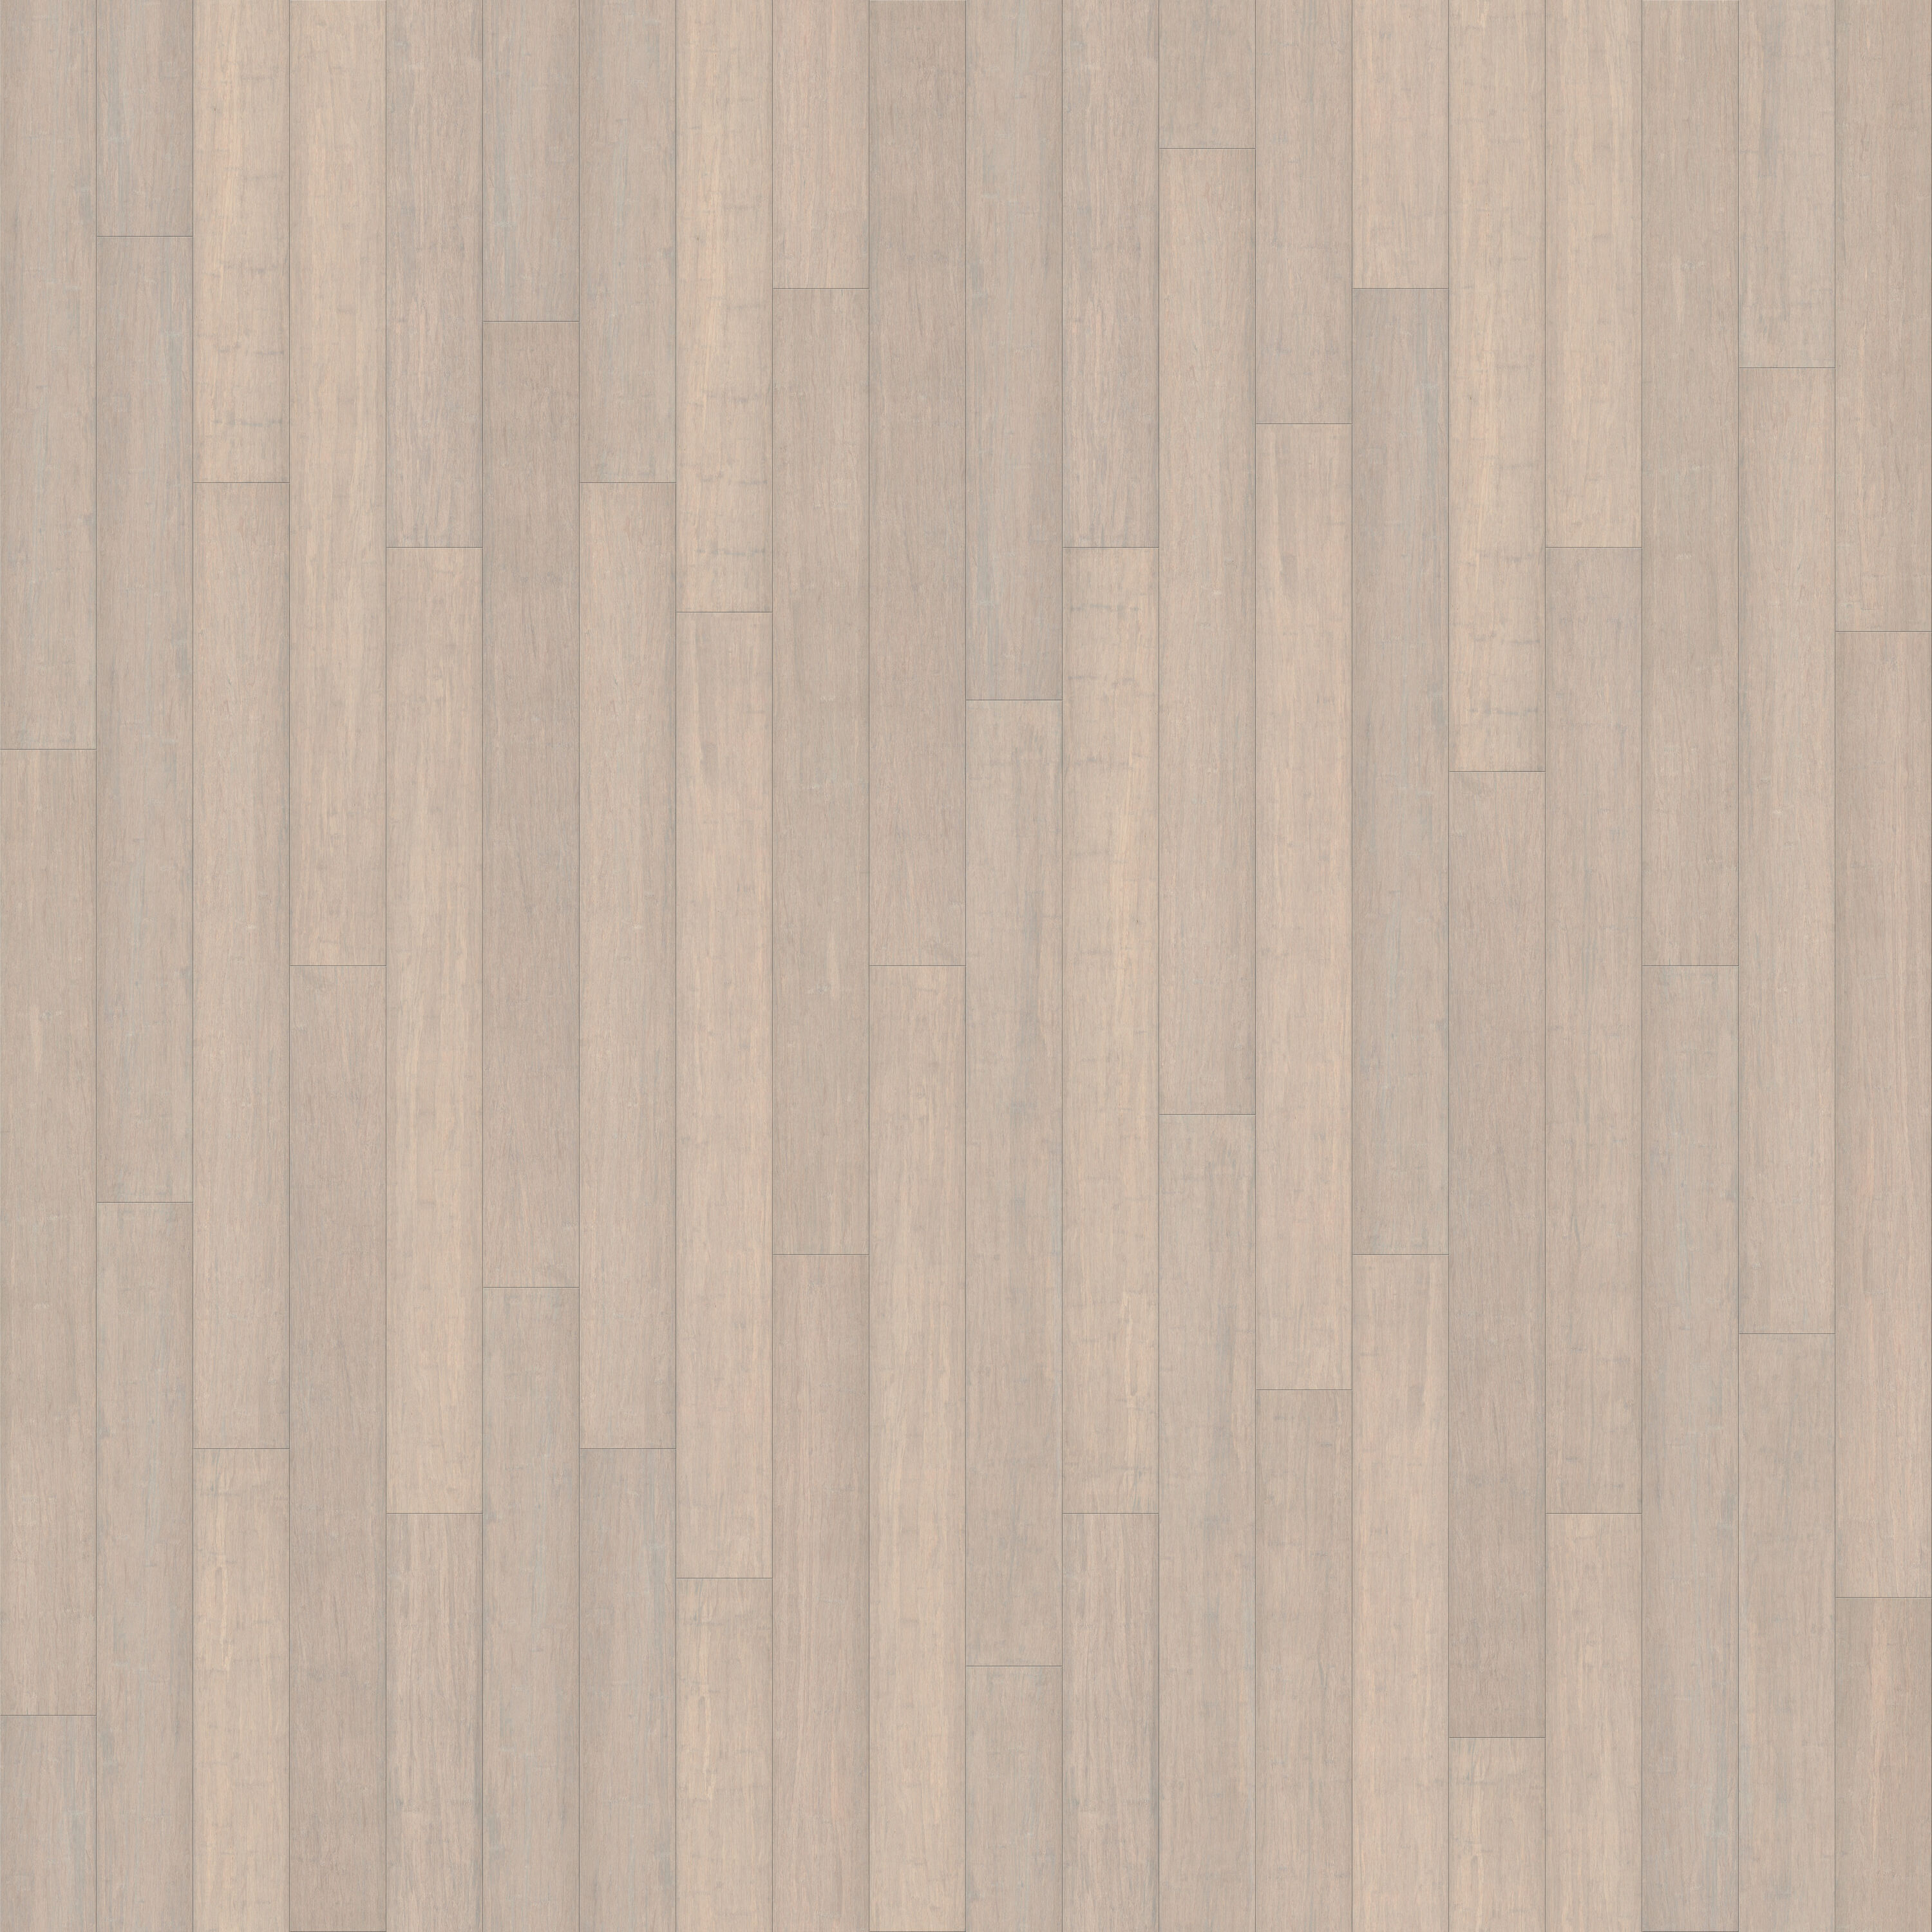 Hot Sale Bamboo Veneer Sheets Vertical Bamboo Wood Core for